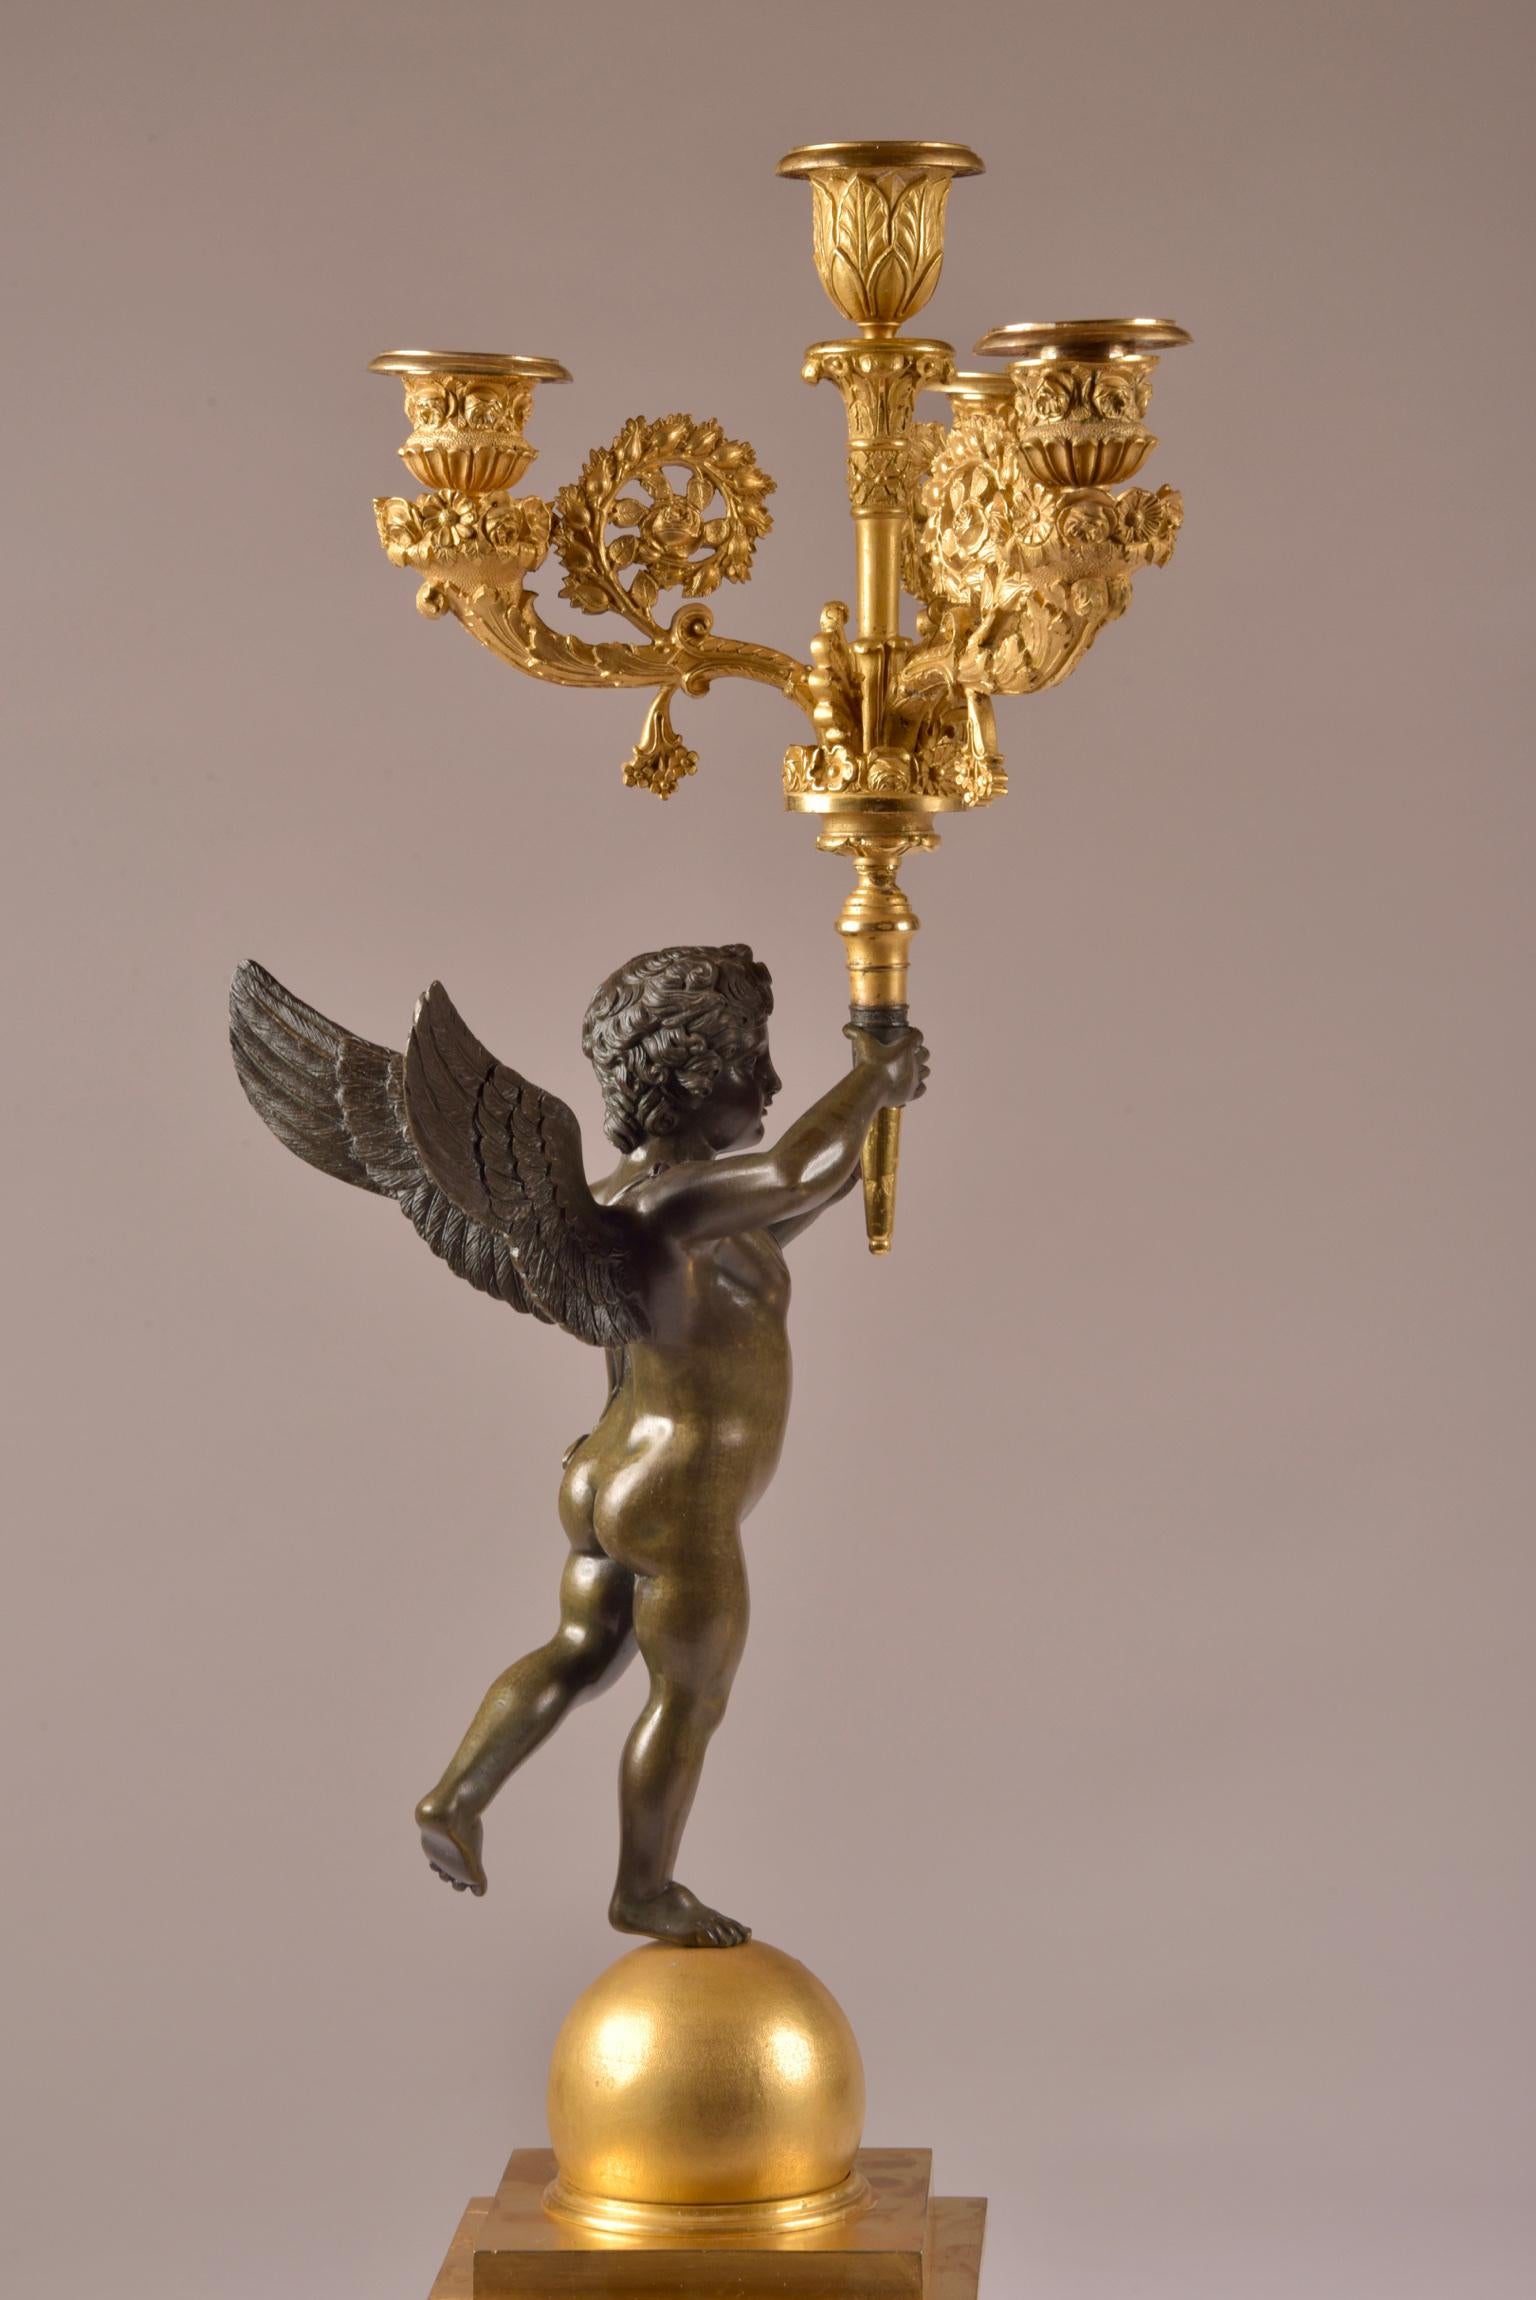 Pair of French Empire Candelabras with Putti, Superb Ormolu Candleholders, 1810  (Bronze) im Angebot